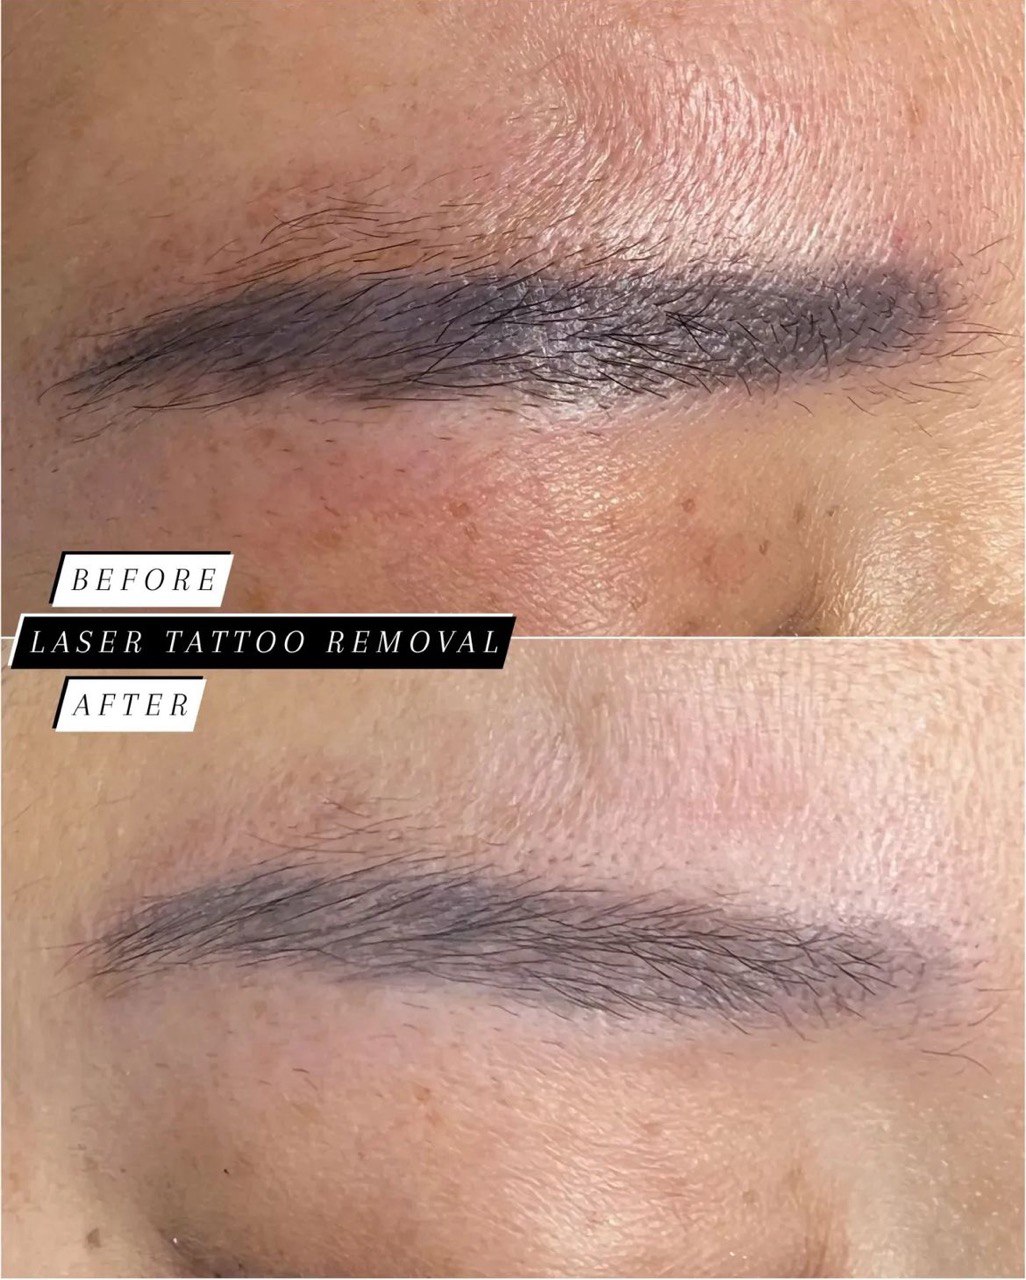 Laser Tattoo Removal. Cosmetic and Mediical Tattoo by Dasha. Permanent makeup and reconstructive tattoo, scalp micro-pigmentation in Christchurch, New Zealand